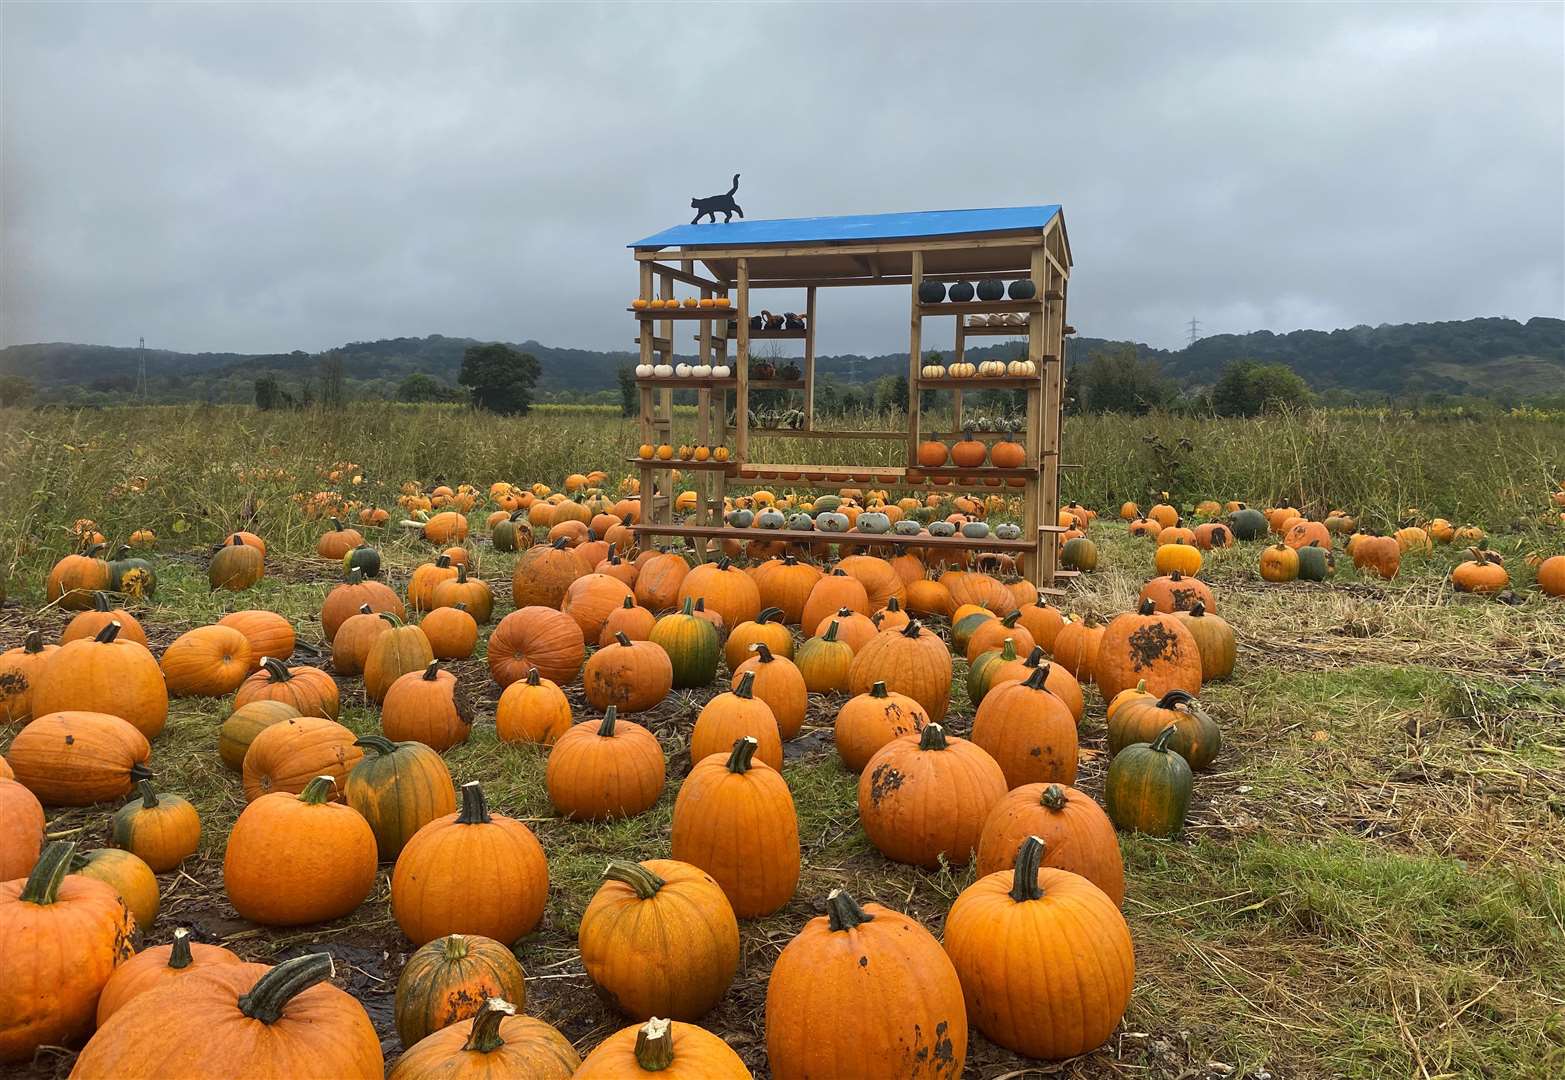 The farm in Old Chatham Road, Maidstone, grows a variety of squashes and gourds